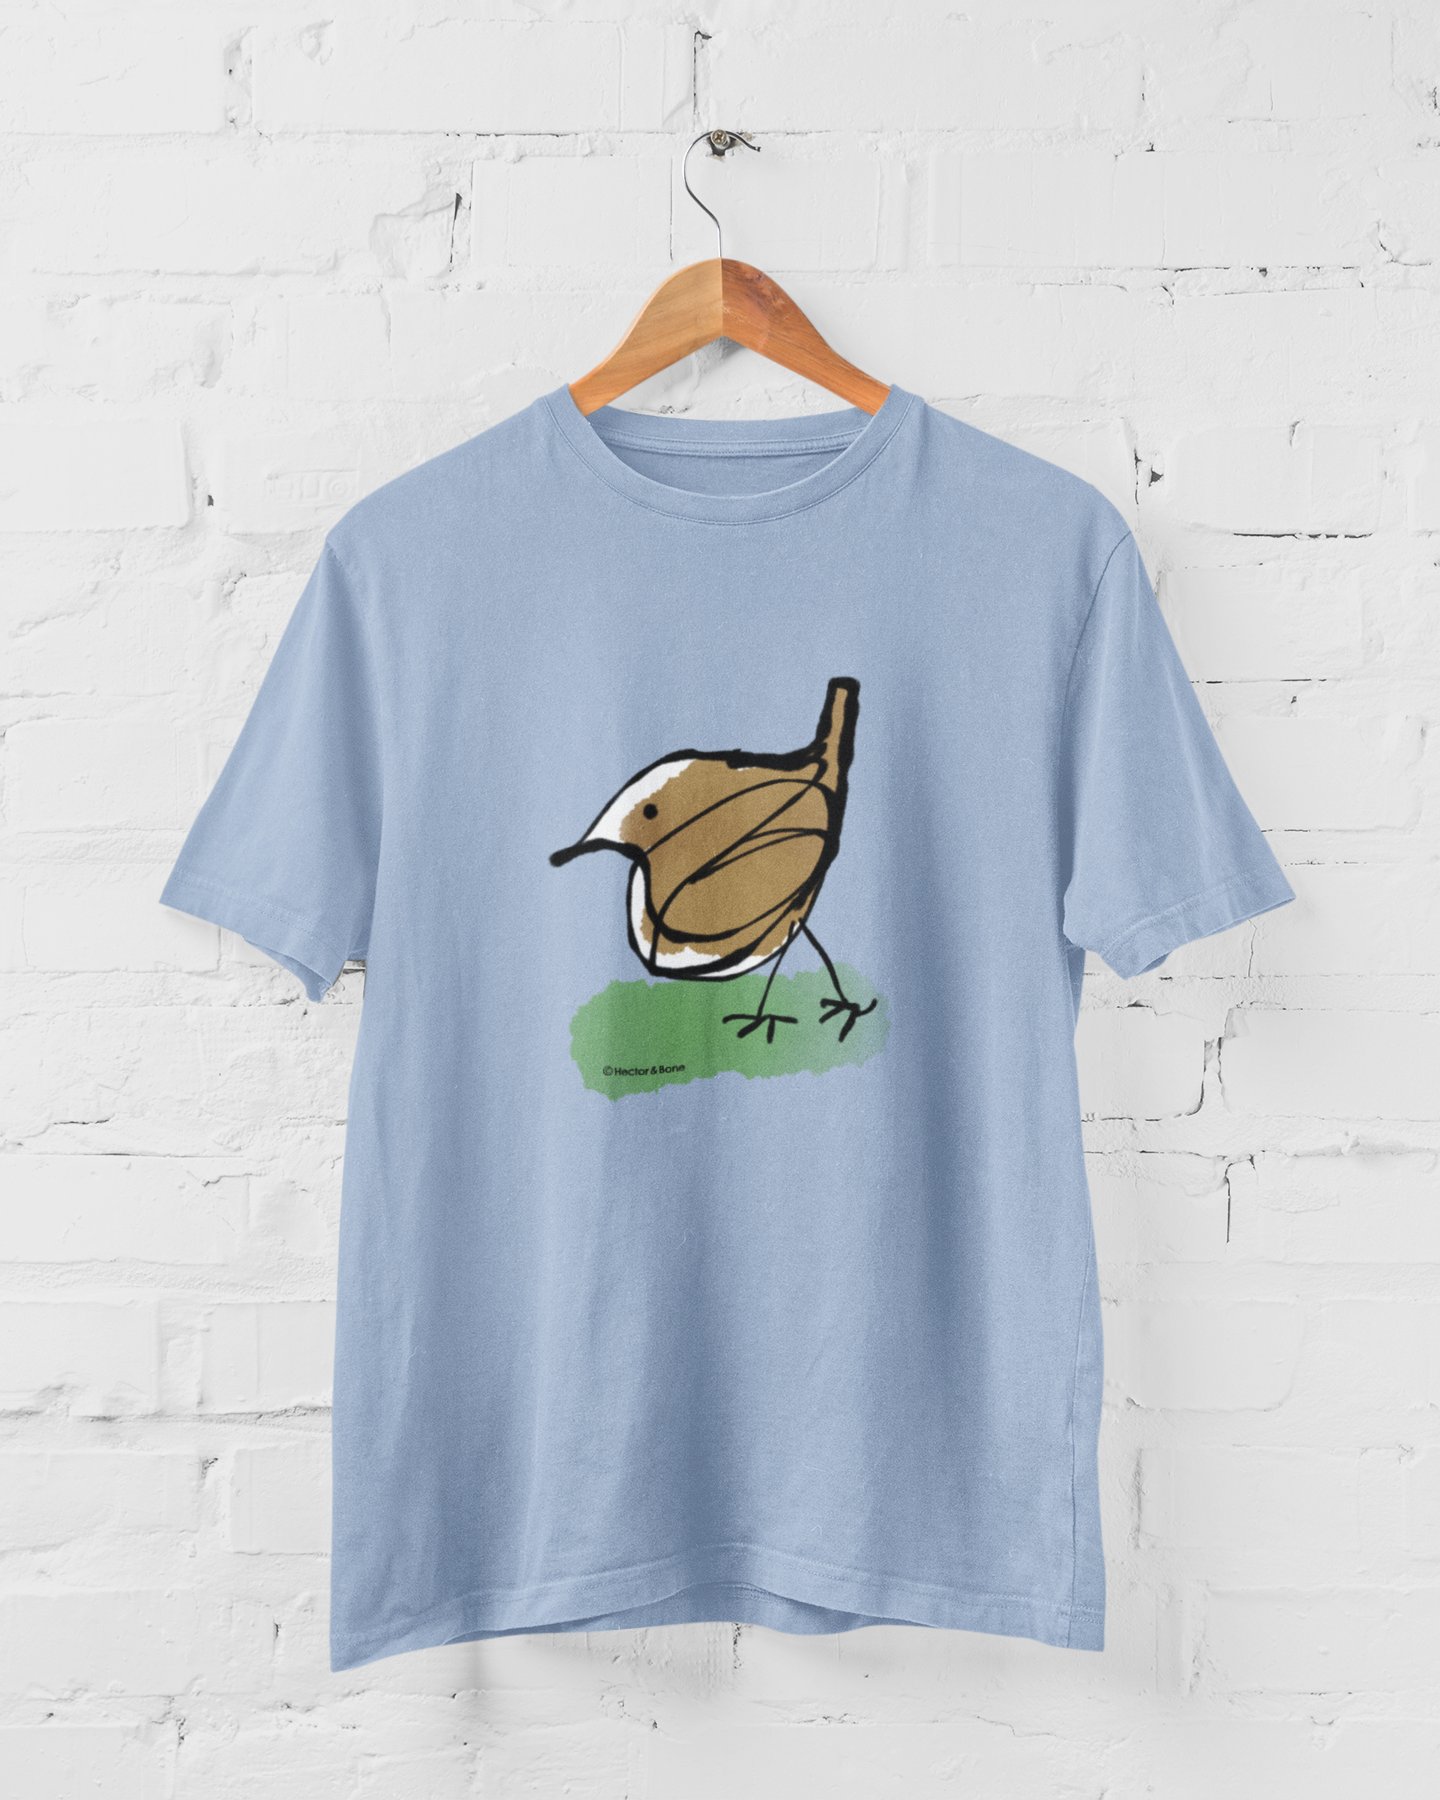 Jenny Wren T-shirt - Ilustrated little Jenny Wren bird t-shirts on sky blue colour vegan cotton t-shirts by Hector and Bone